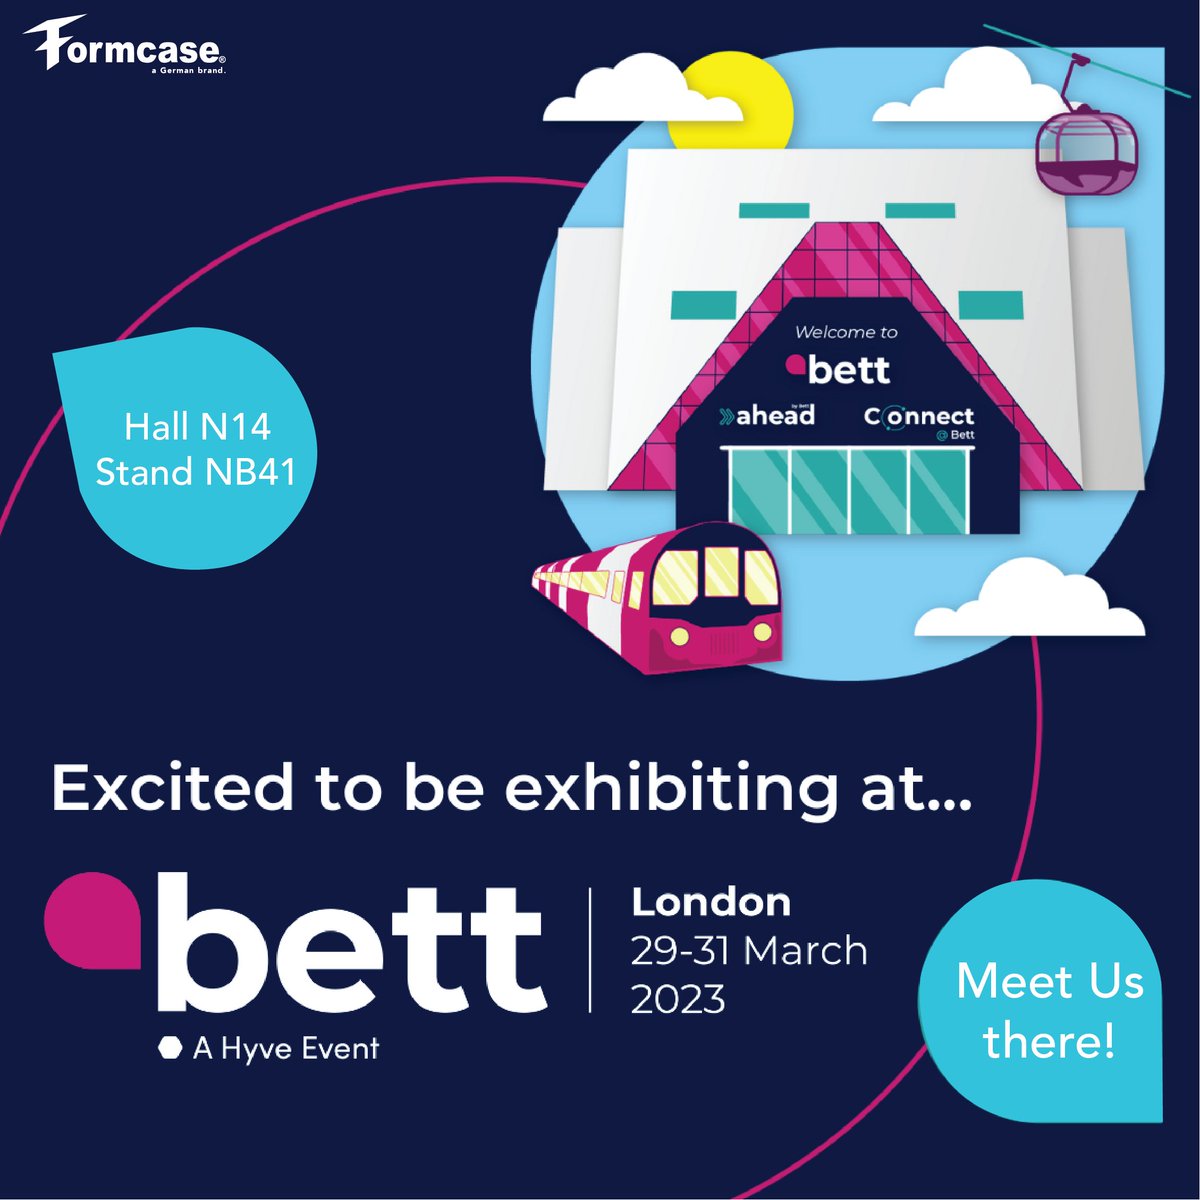 Formcase will be attending @bett_show 2023 in London, UK from March 29-31.

We look forward to seeing you at the German Pavilion.
#formcase #bettshow #bett #bettuk #education #innovation #technology #educationaltechnology #chargingsolution #apple #ipad #tablets #chargingtrolleys